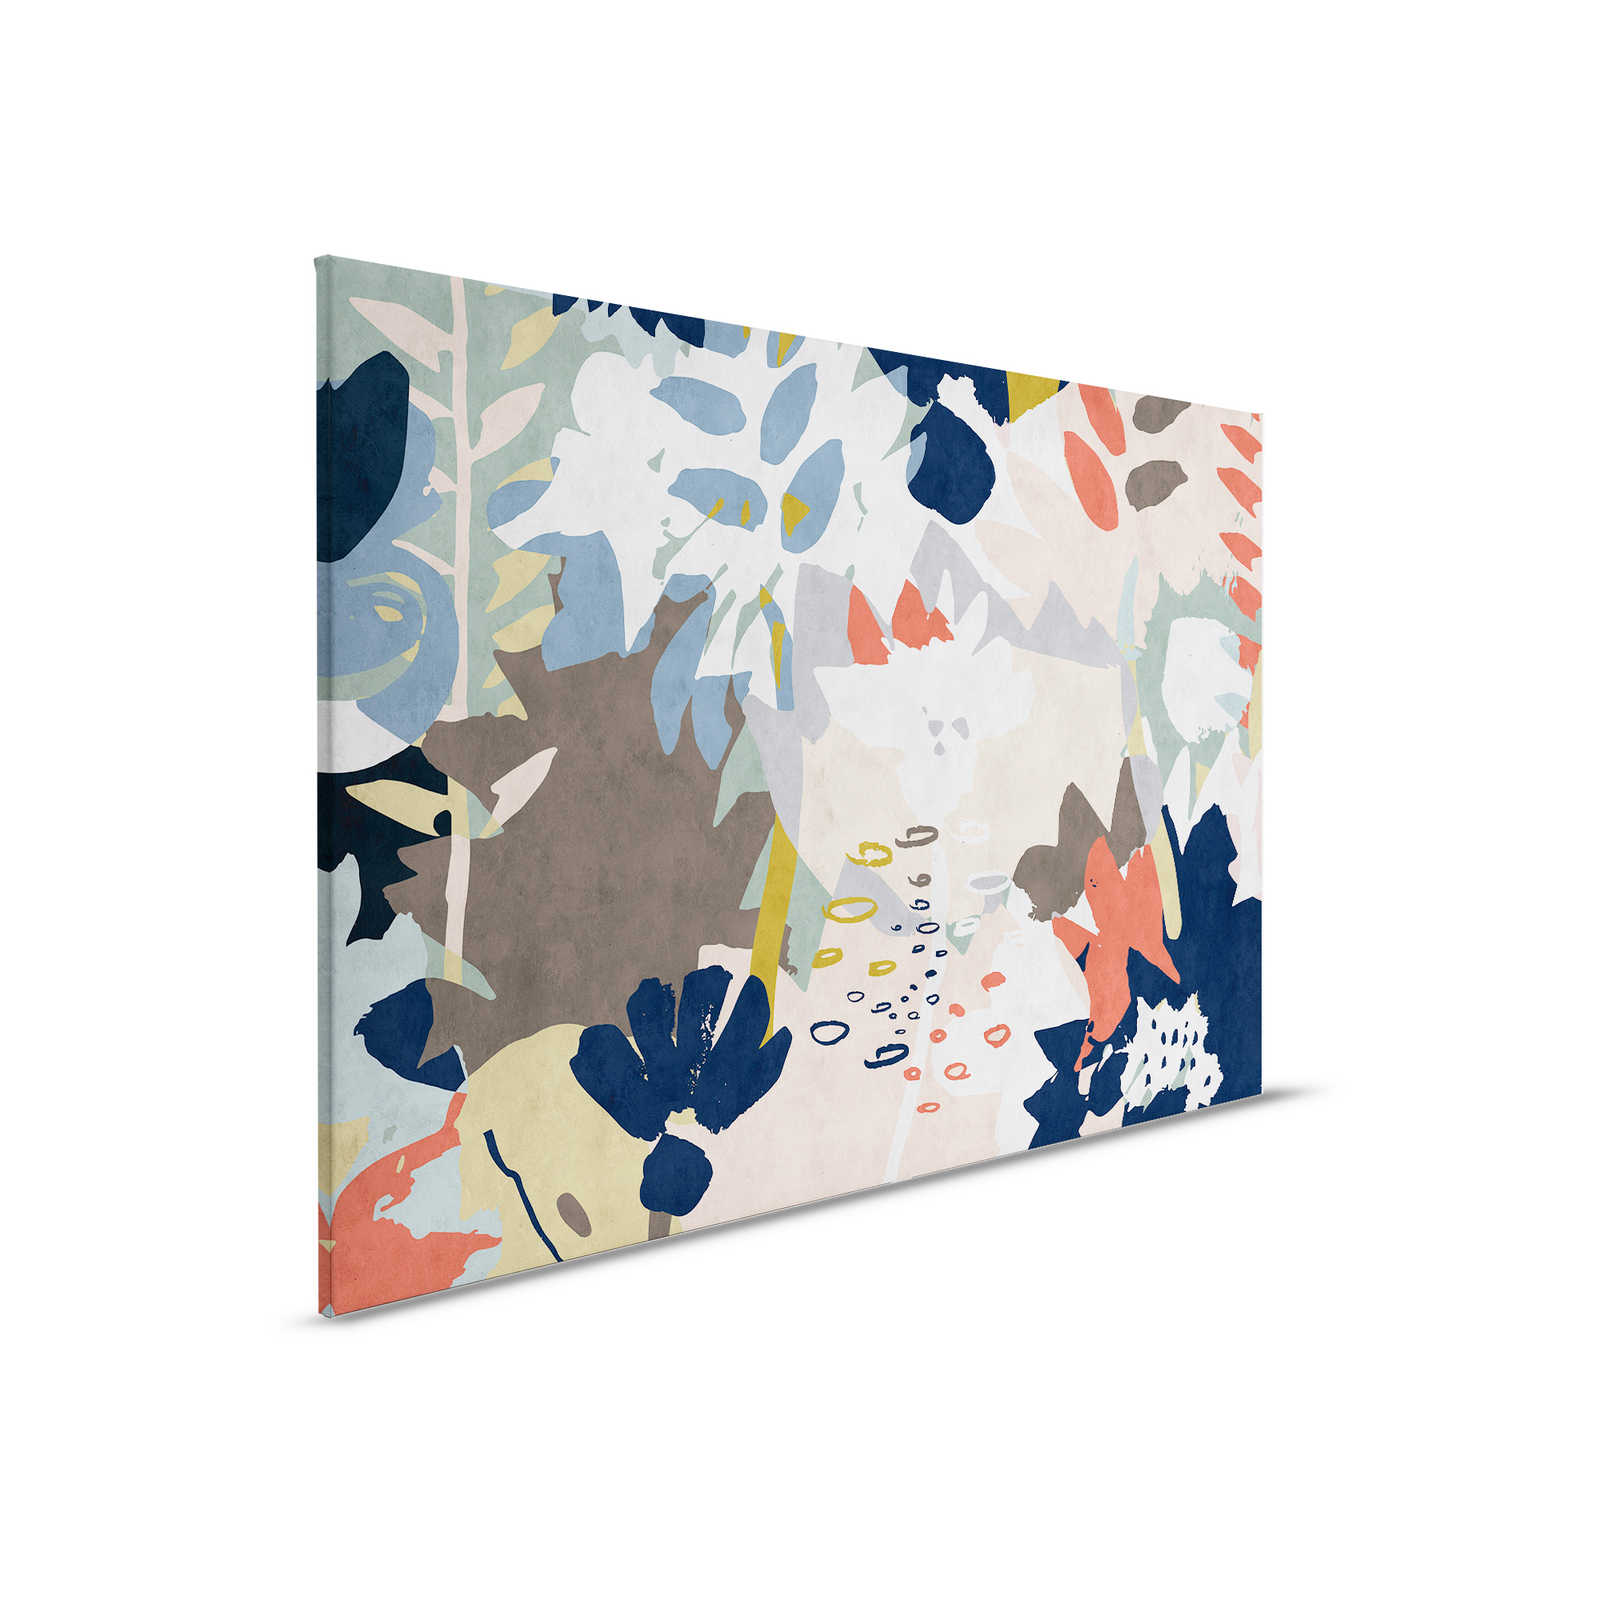         Floral Collage 4 - Canvas painting with colourful leaf motif - blotting paper structure - 0.90 m x 0.60 m
    